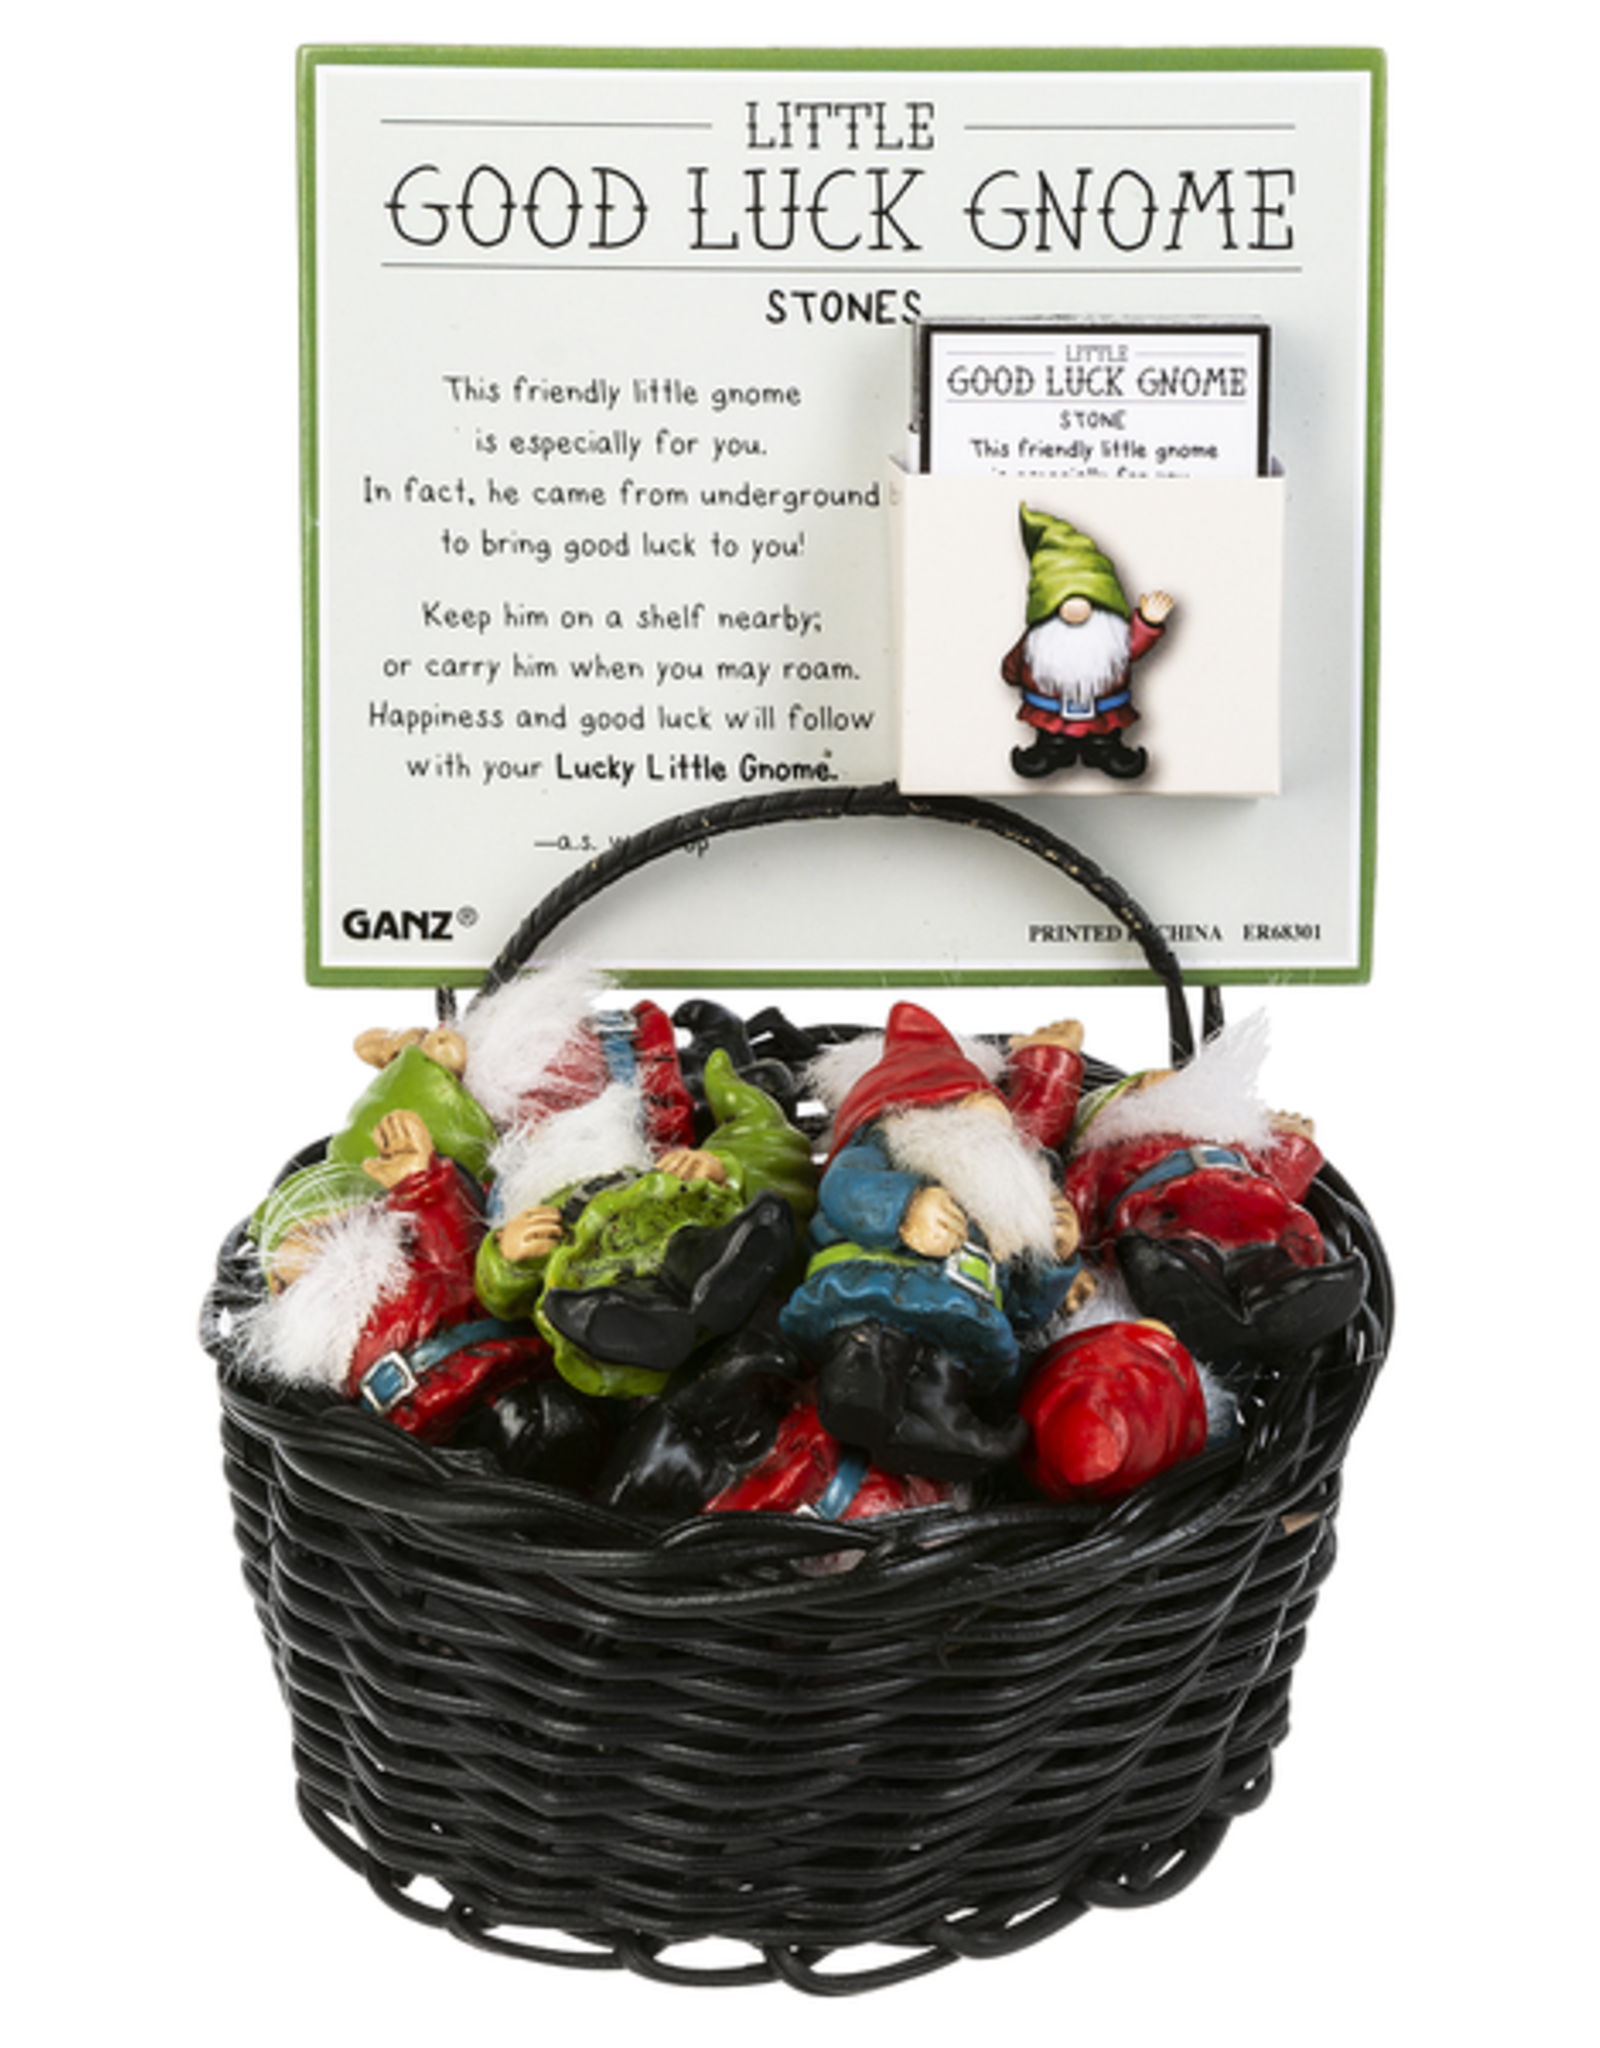 Ganz Good Luck Gnomes Stones - Assorted